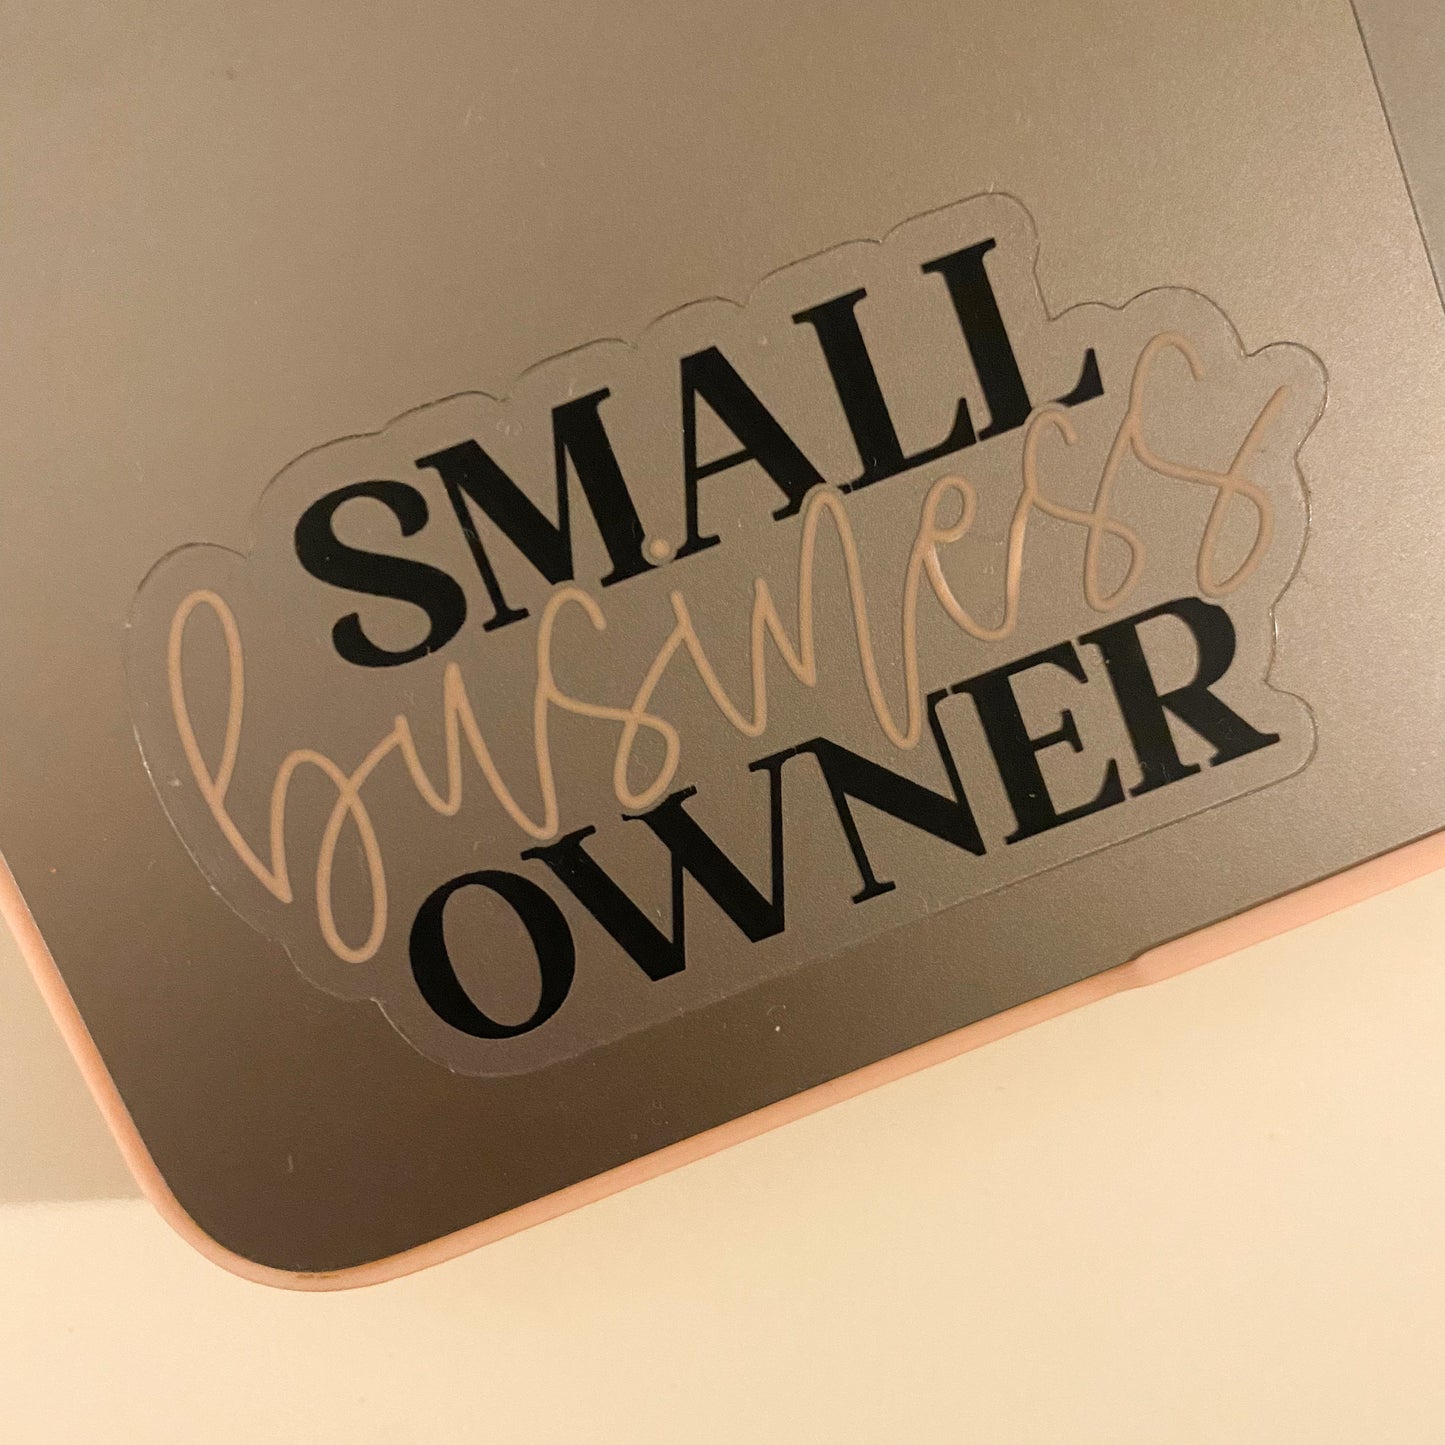 Small Business Owner Clear Sticker